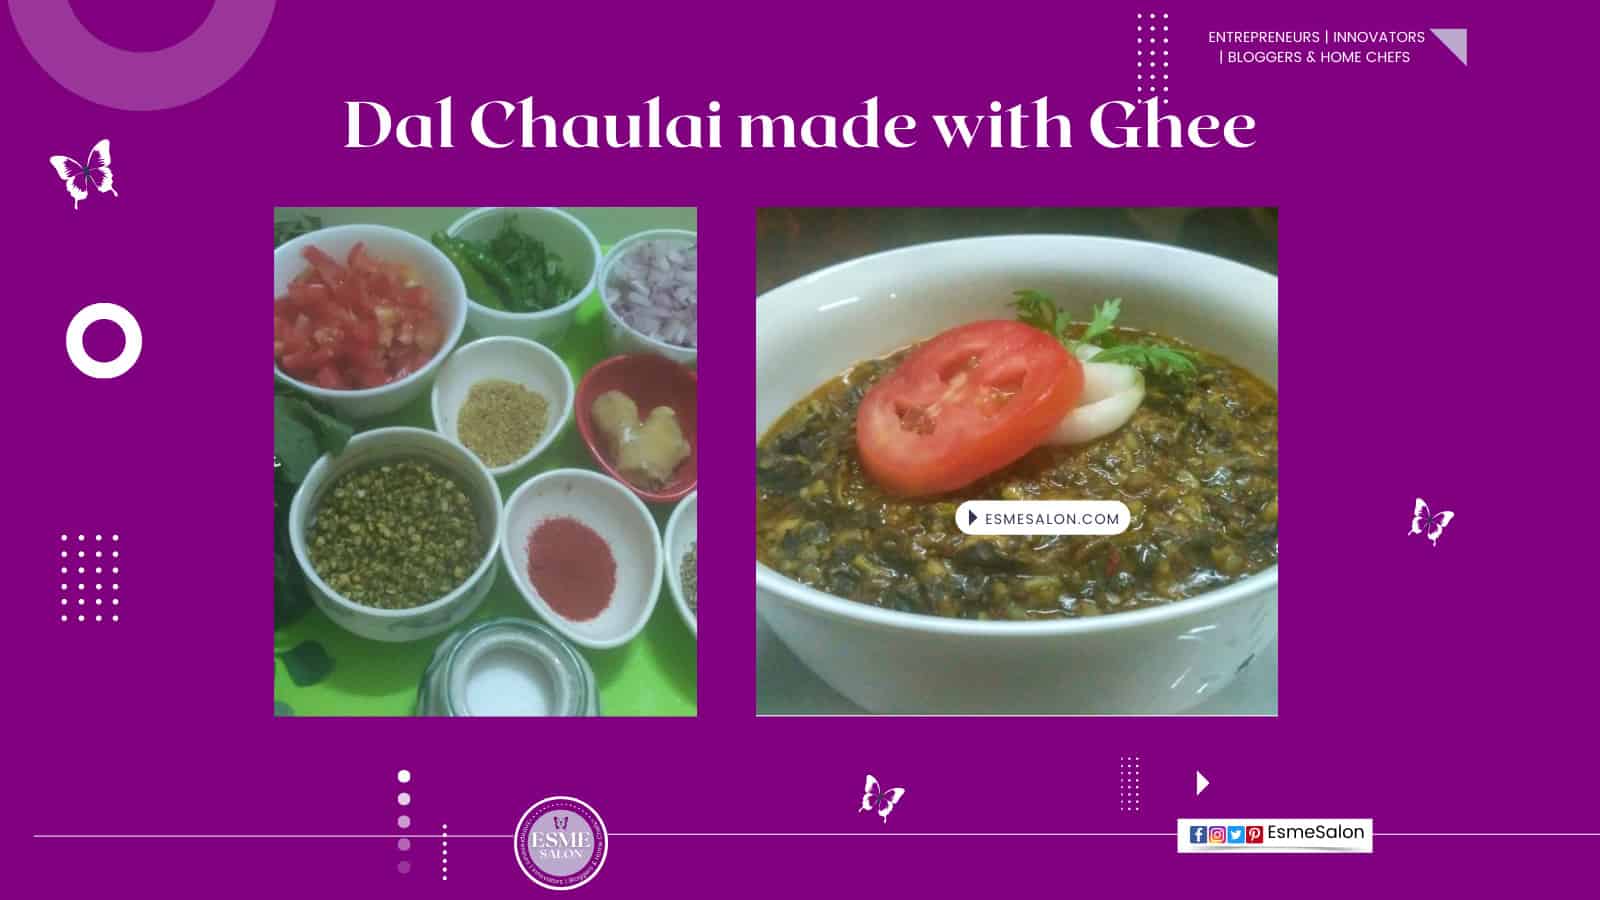 an image of a white bowl with Dal Chaulai (spinach) made with Ghee (clarified butter) and a separate platter with all the ingredients